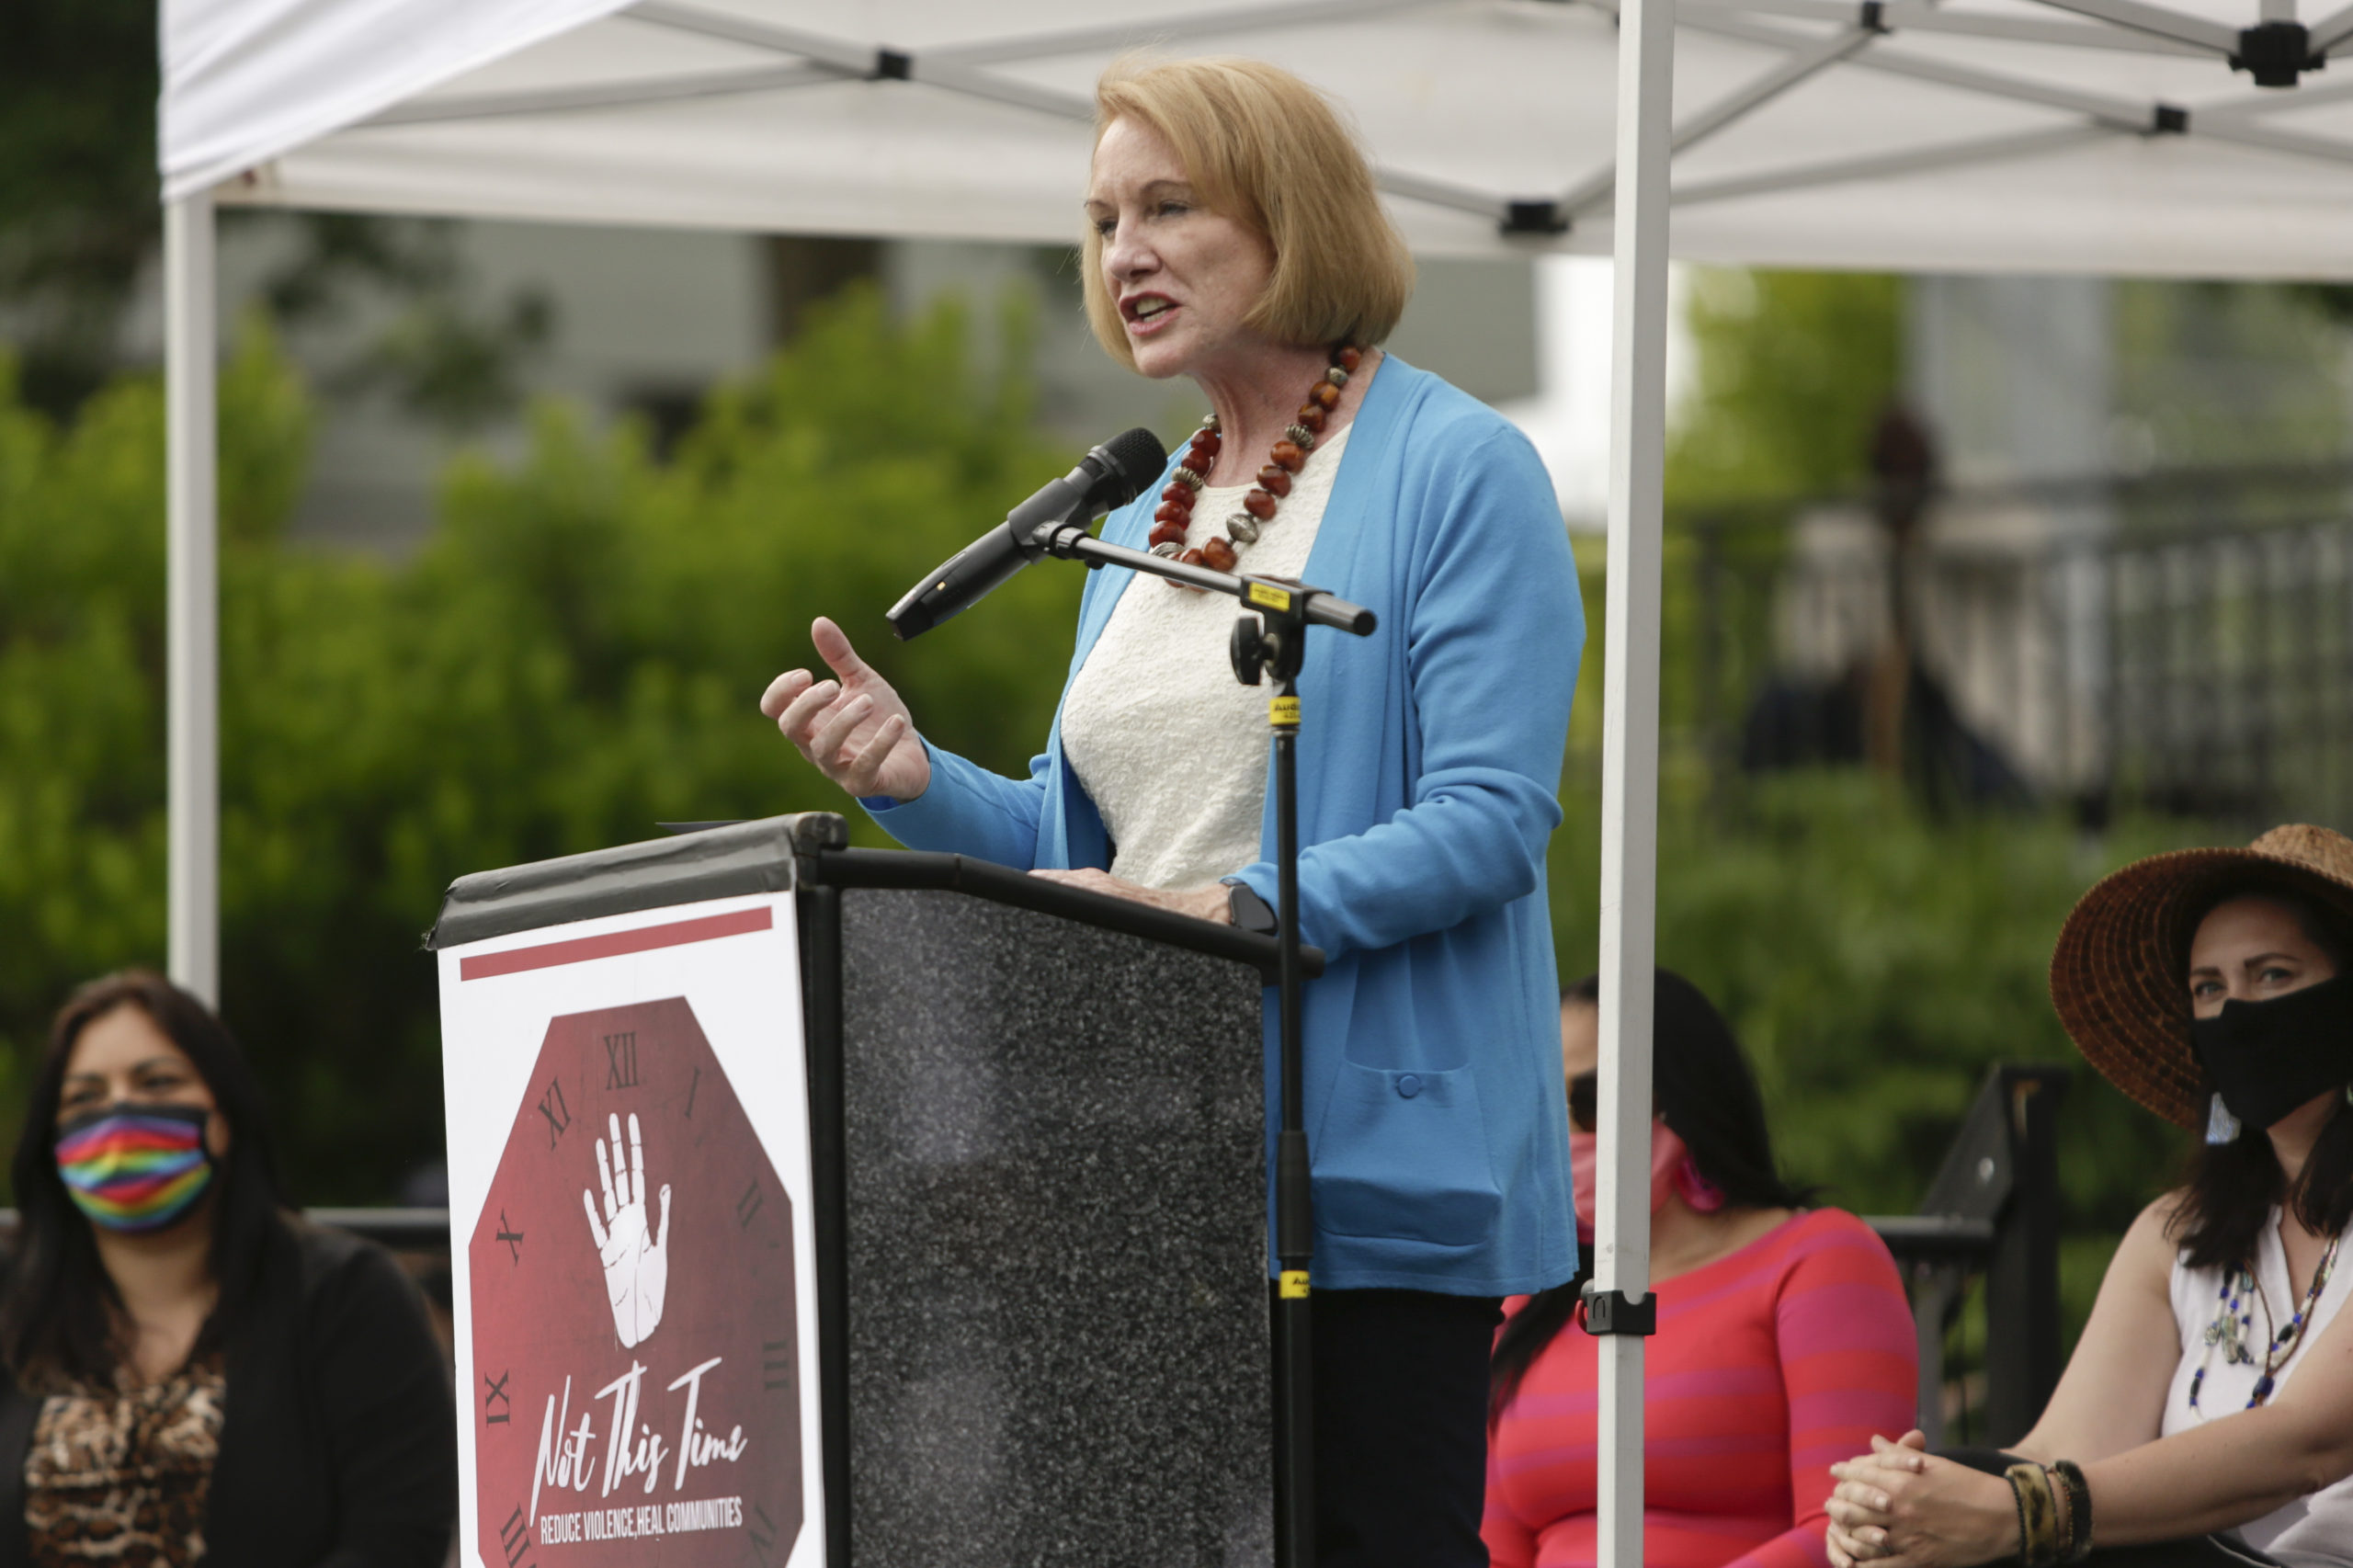 Seattle Mayor Jenny Durkan speaks during a rally hosted by Andre Taylor, in Seattle on June 19. (Jason Redmond/AFP via Getty Images)